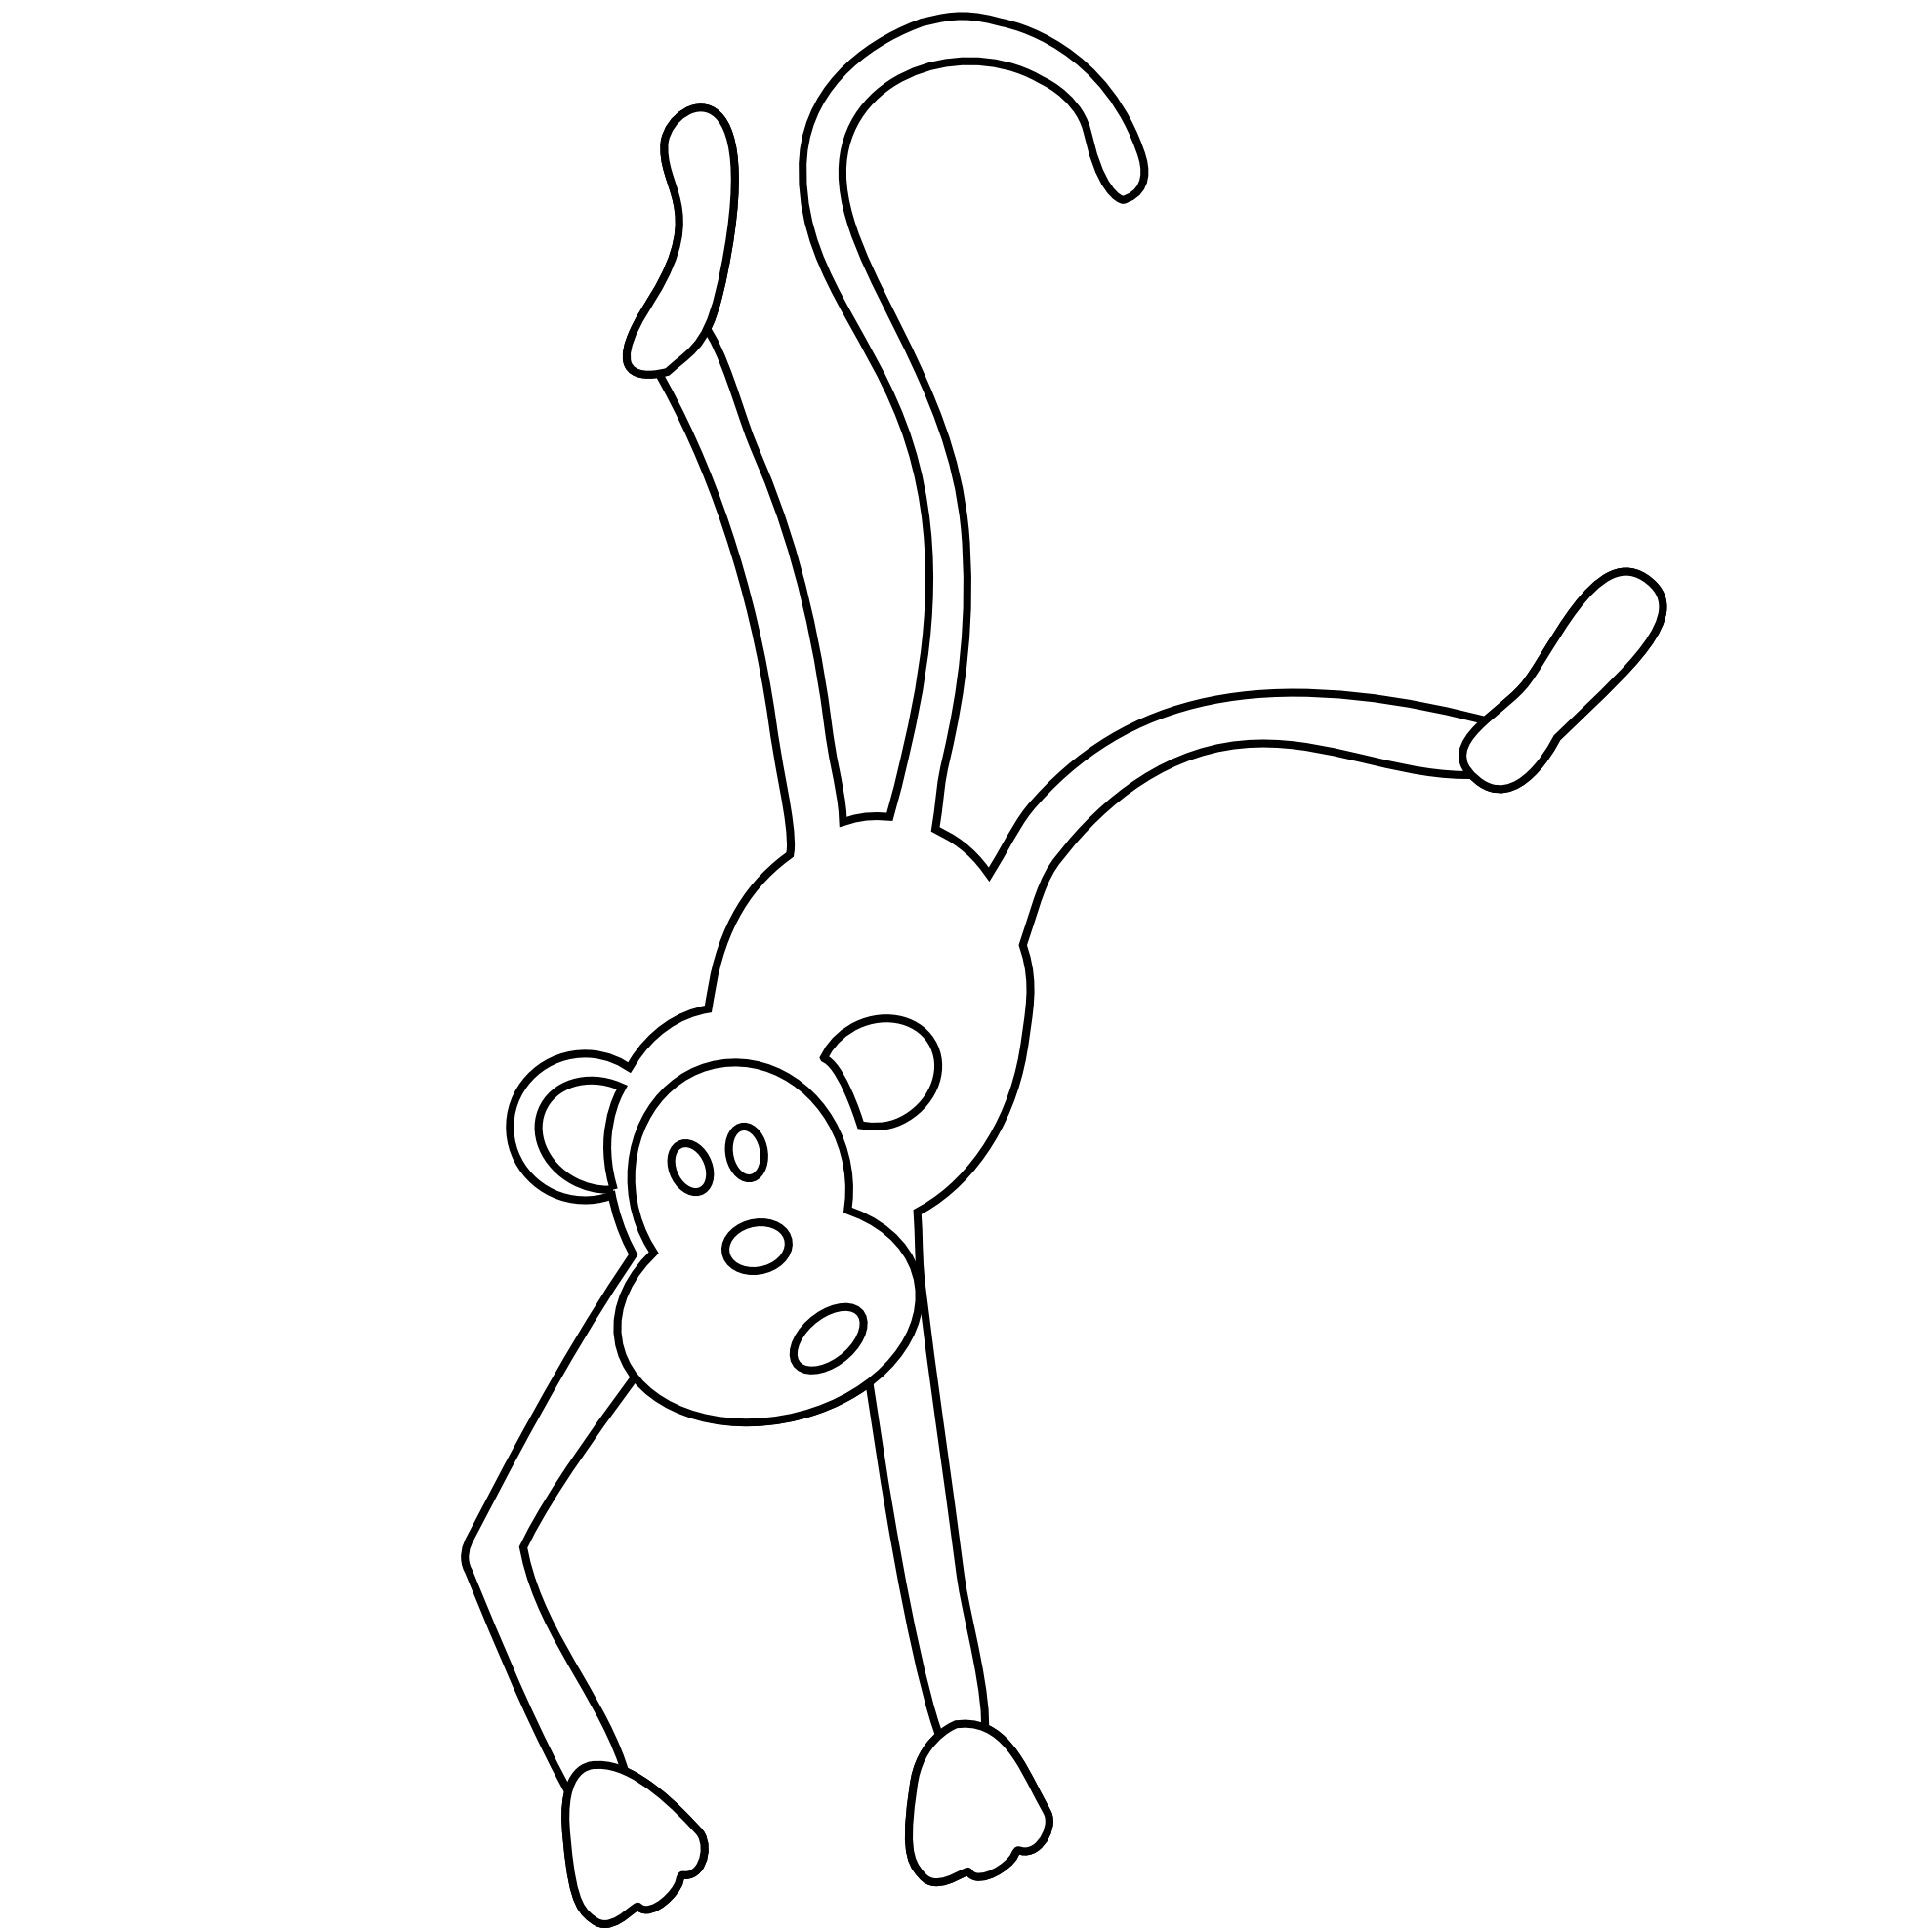 PNG Monkey Black And White - 42249